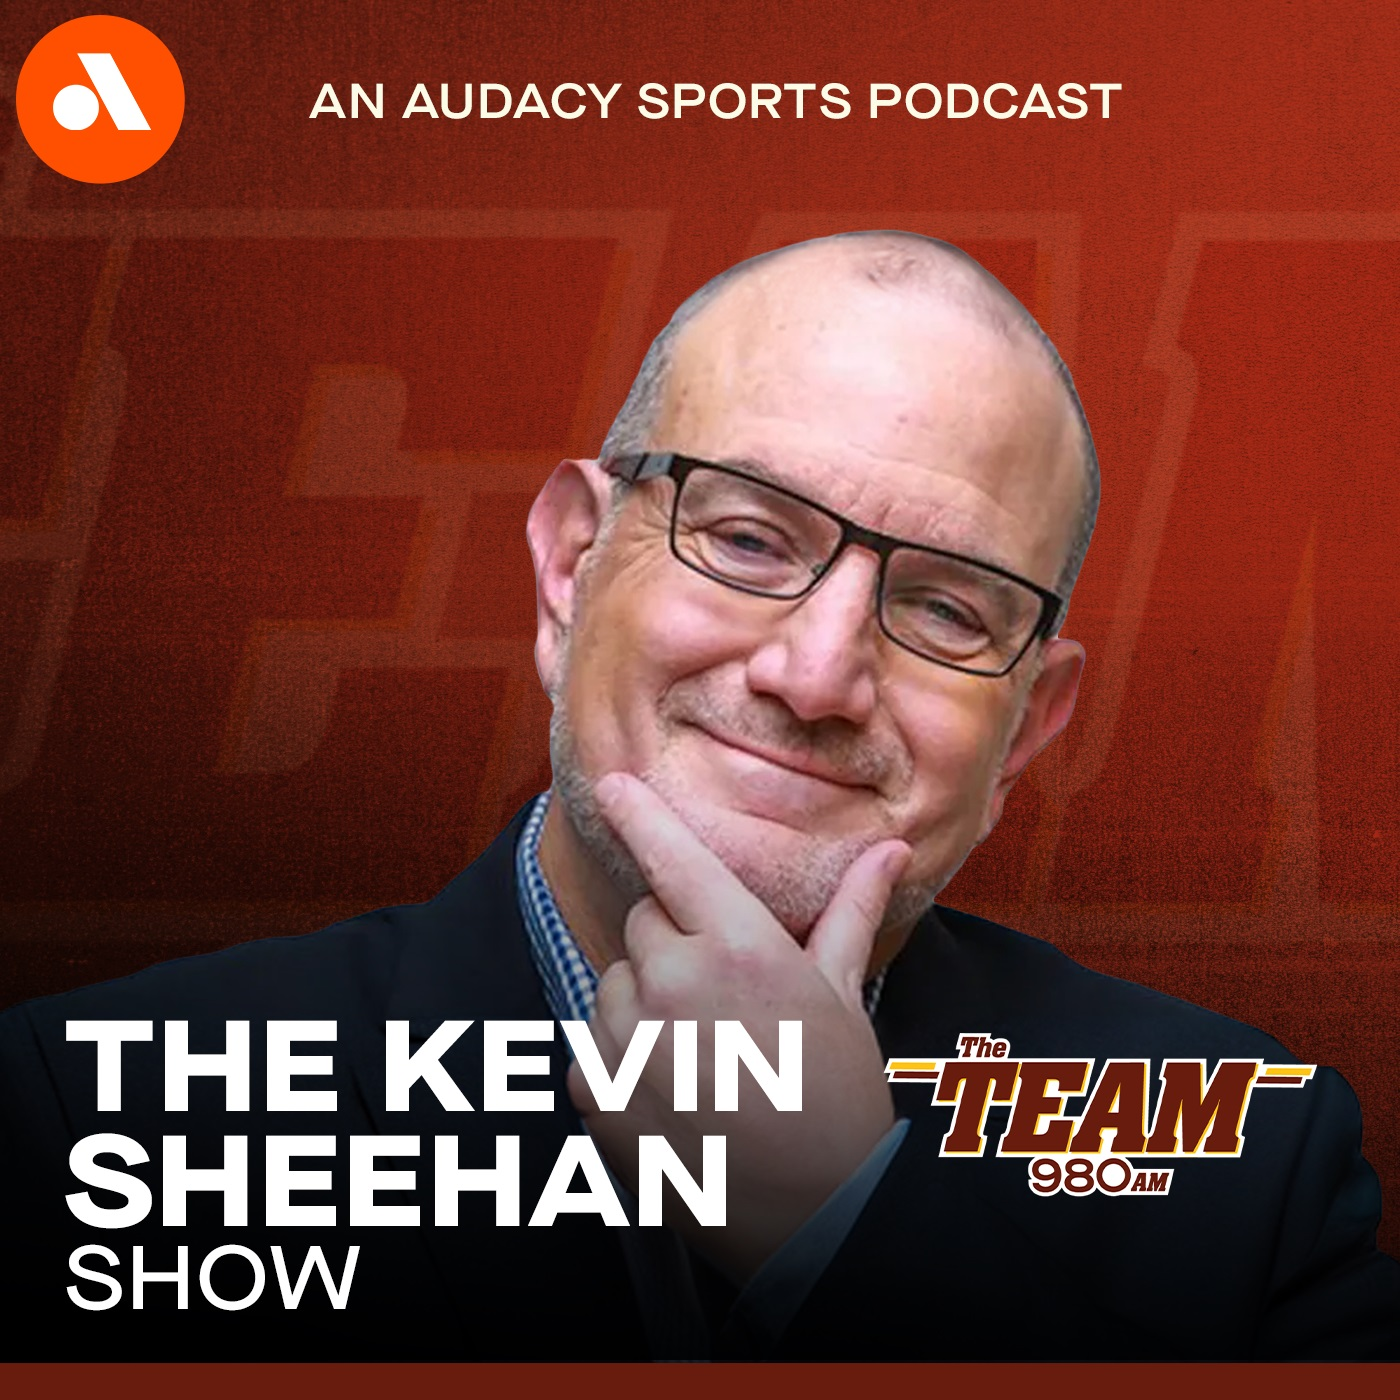 Kevin is stunned by the Top 100 athlete list